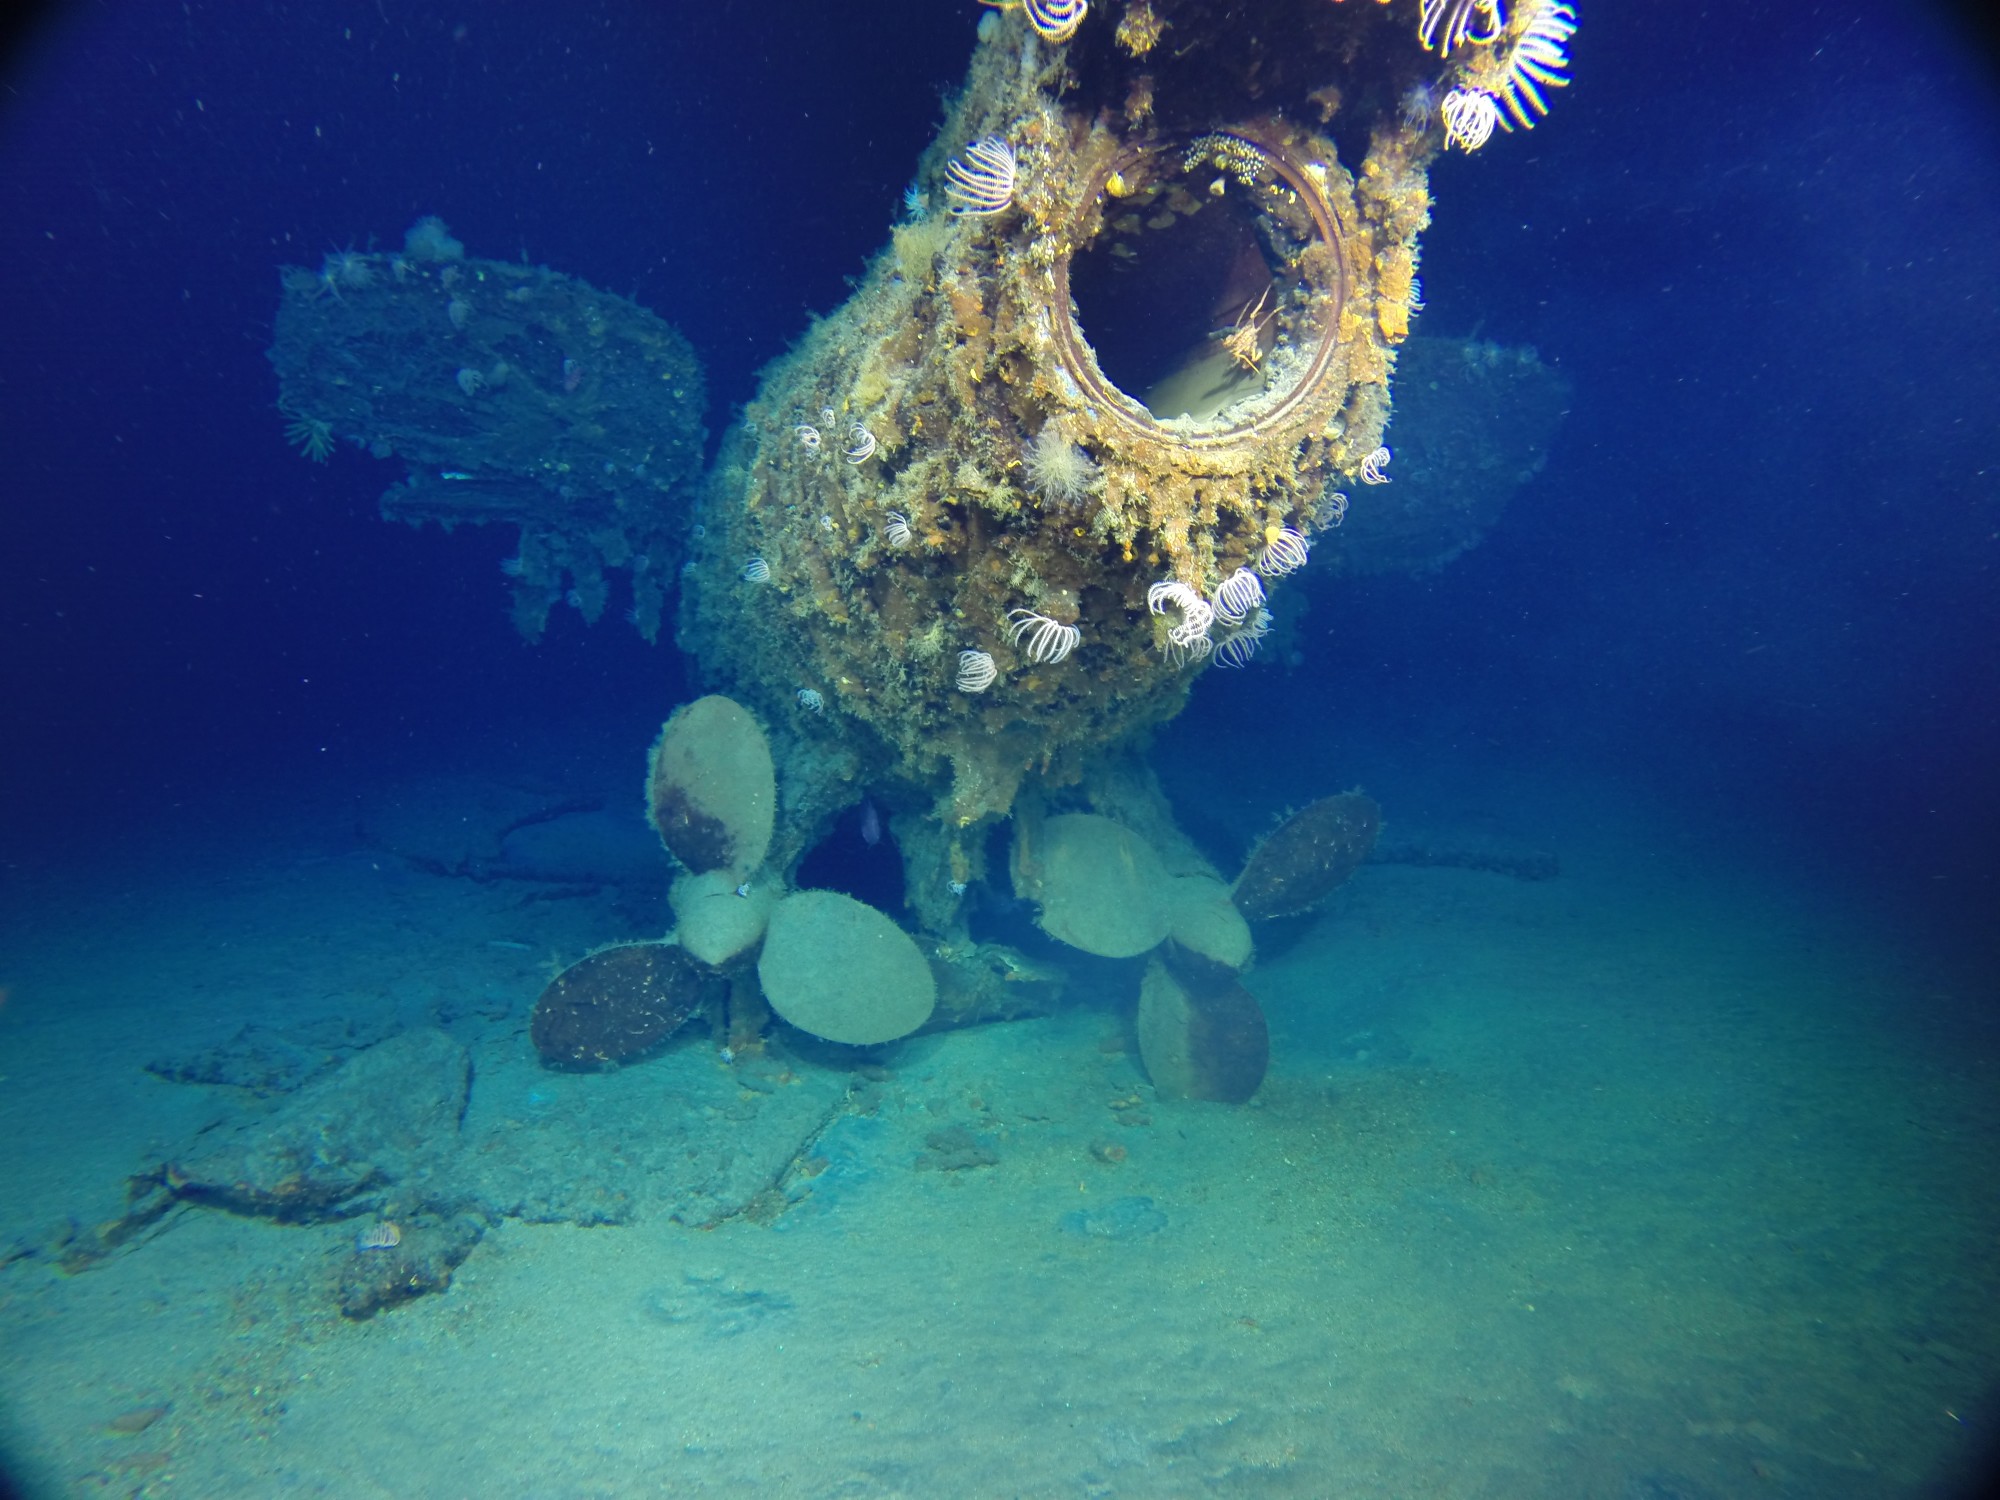 AE1’s disarticulated skeg and rudder lay on the seabed beneath the submarine’s port propeller. Image: Paul G. Allen, Find AE1 Ltd., ANMM and Curtin University. Copyright, Navigea Ltd. 